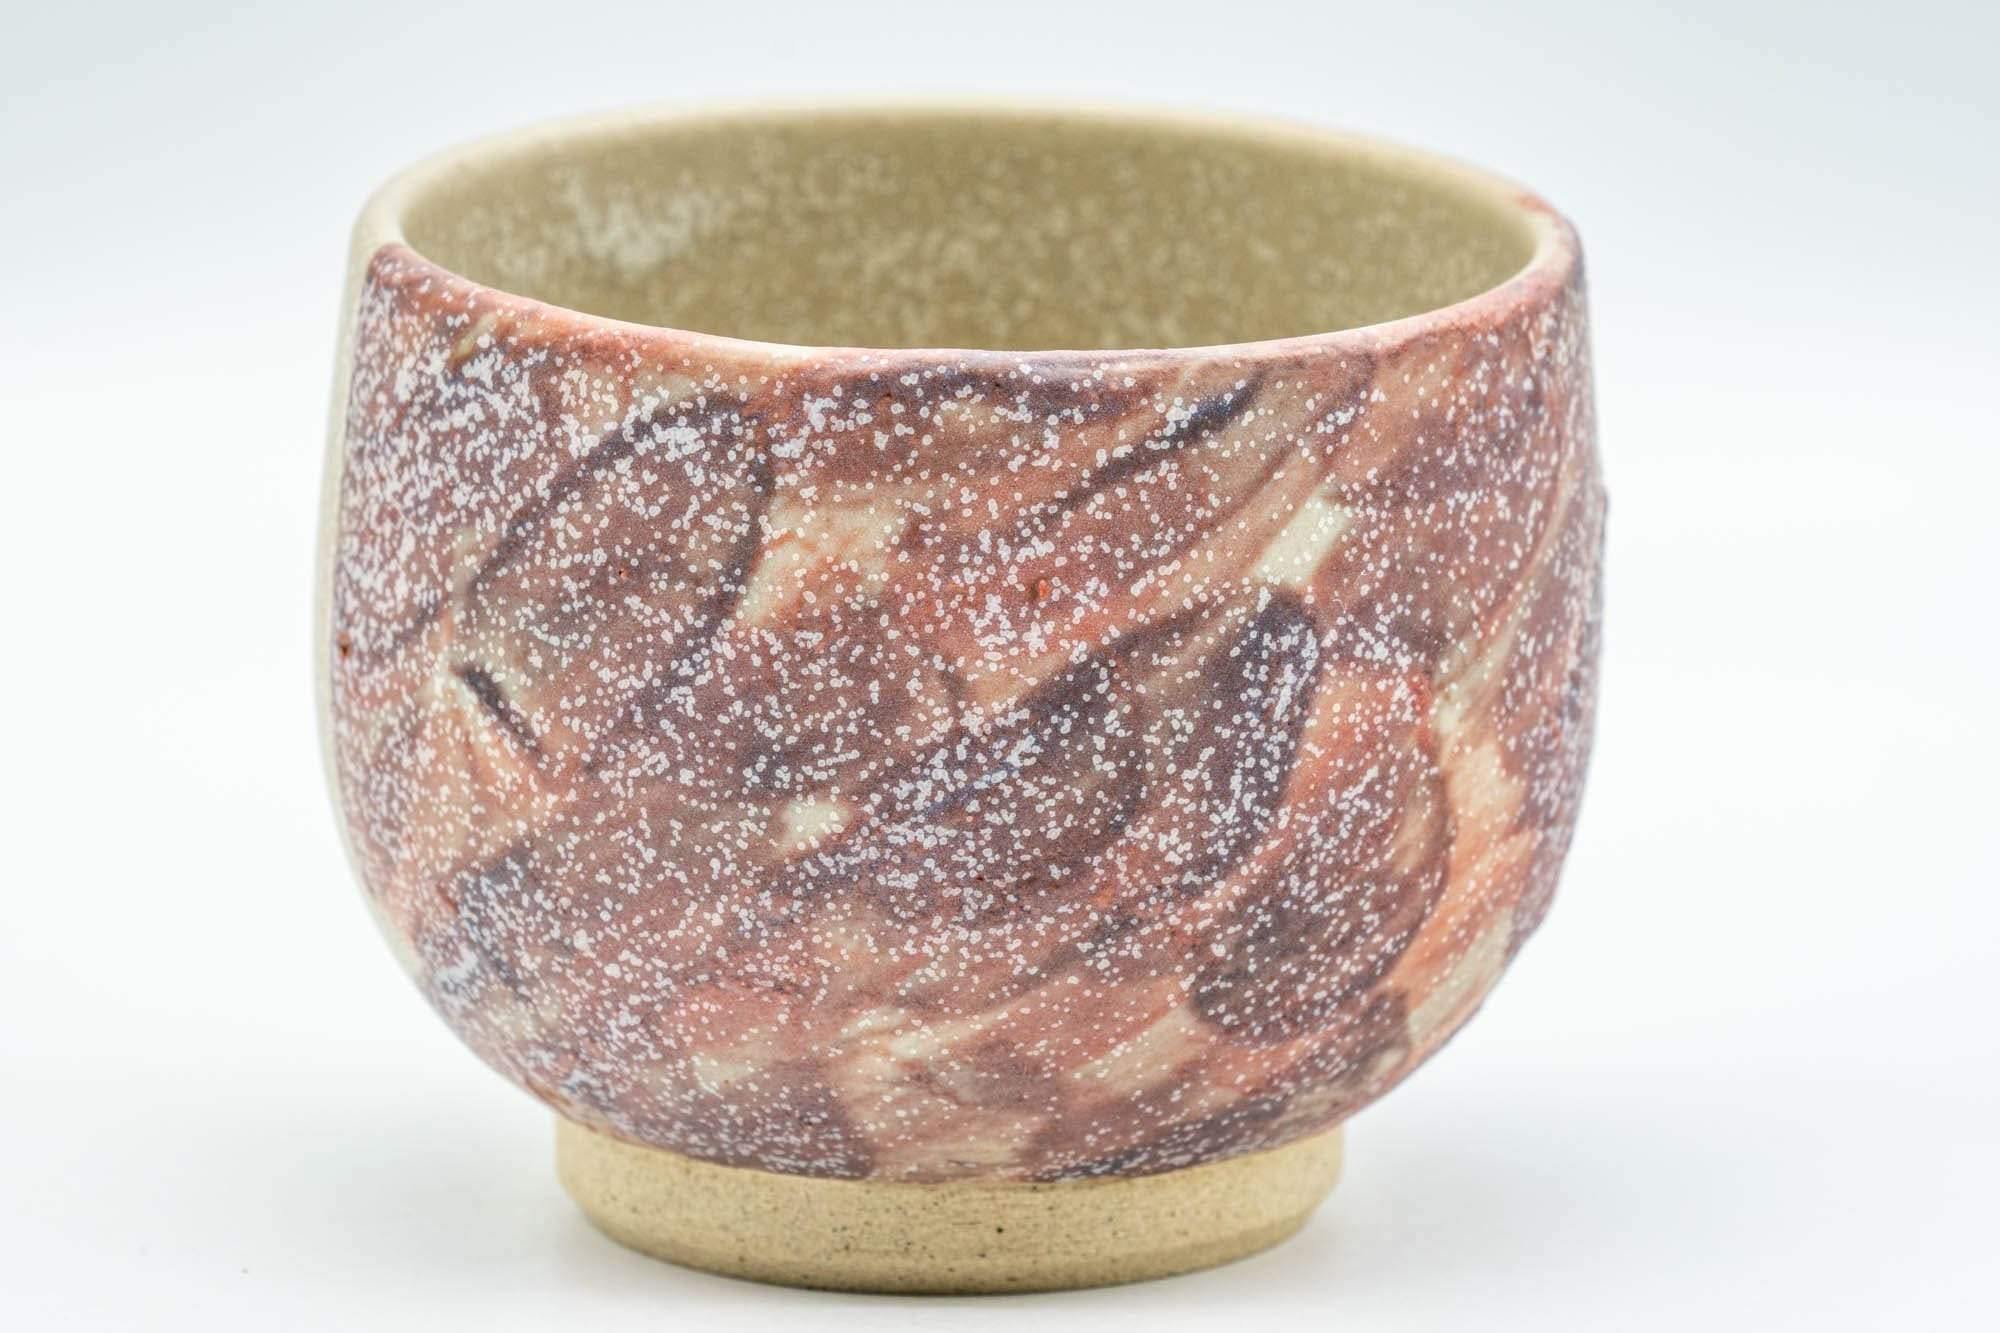 Japanese Teacup - Beige and Magenta Speckled Yunomi - 150ml - Tezumi